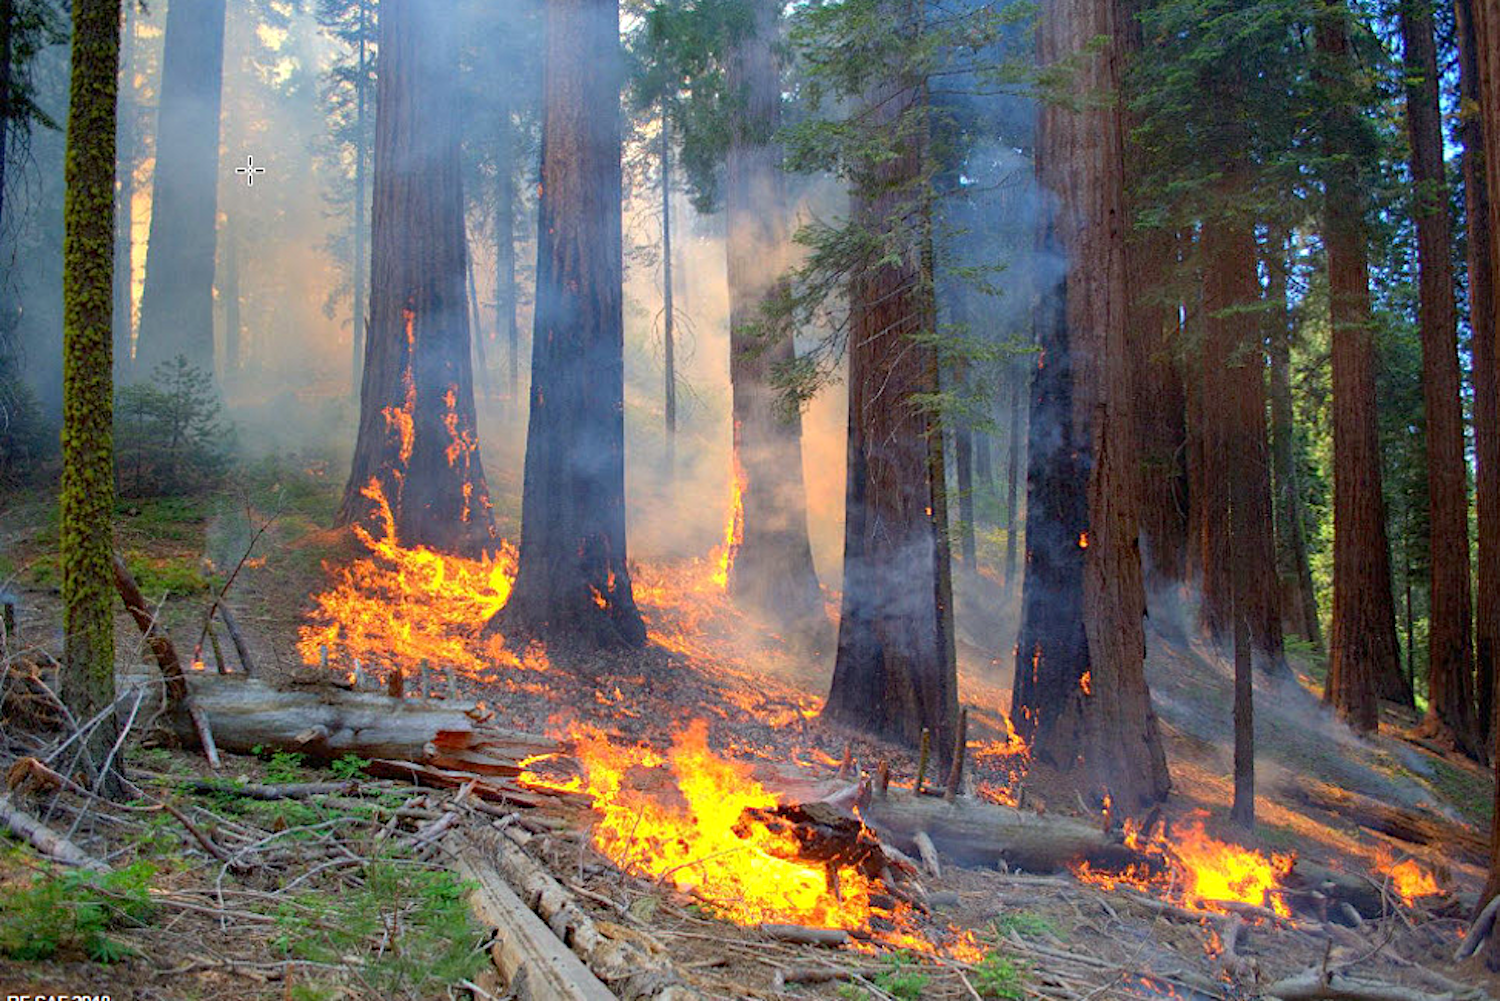 1Surface fire being reintroduced to a Giant Sequoia grove, Kings Canyon National Park. Note how fire is, in Muir's words, " …rising here and there to a foot or two on dry twigs…” with the occasional “fierce bonfires lighted, where heavy branches broken of